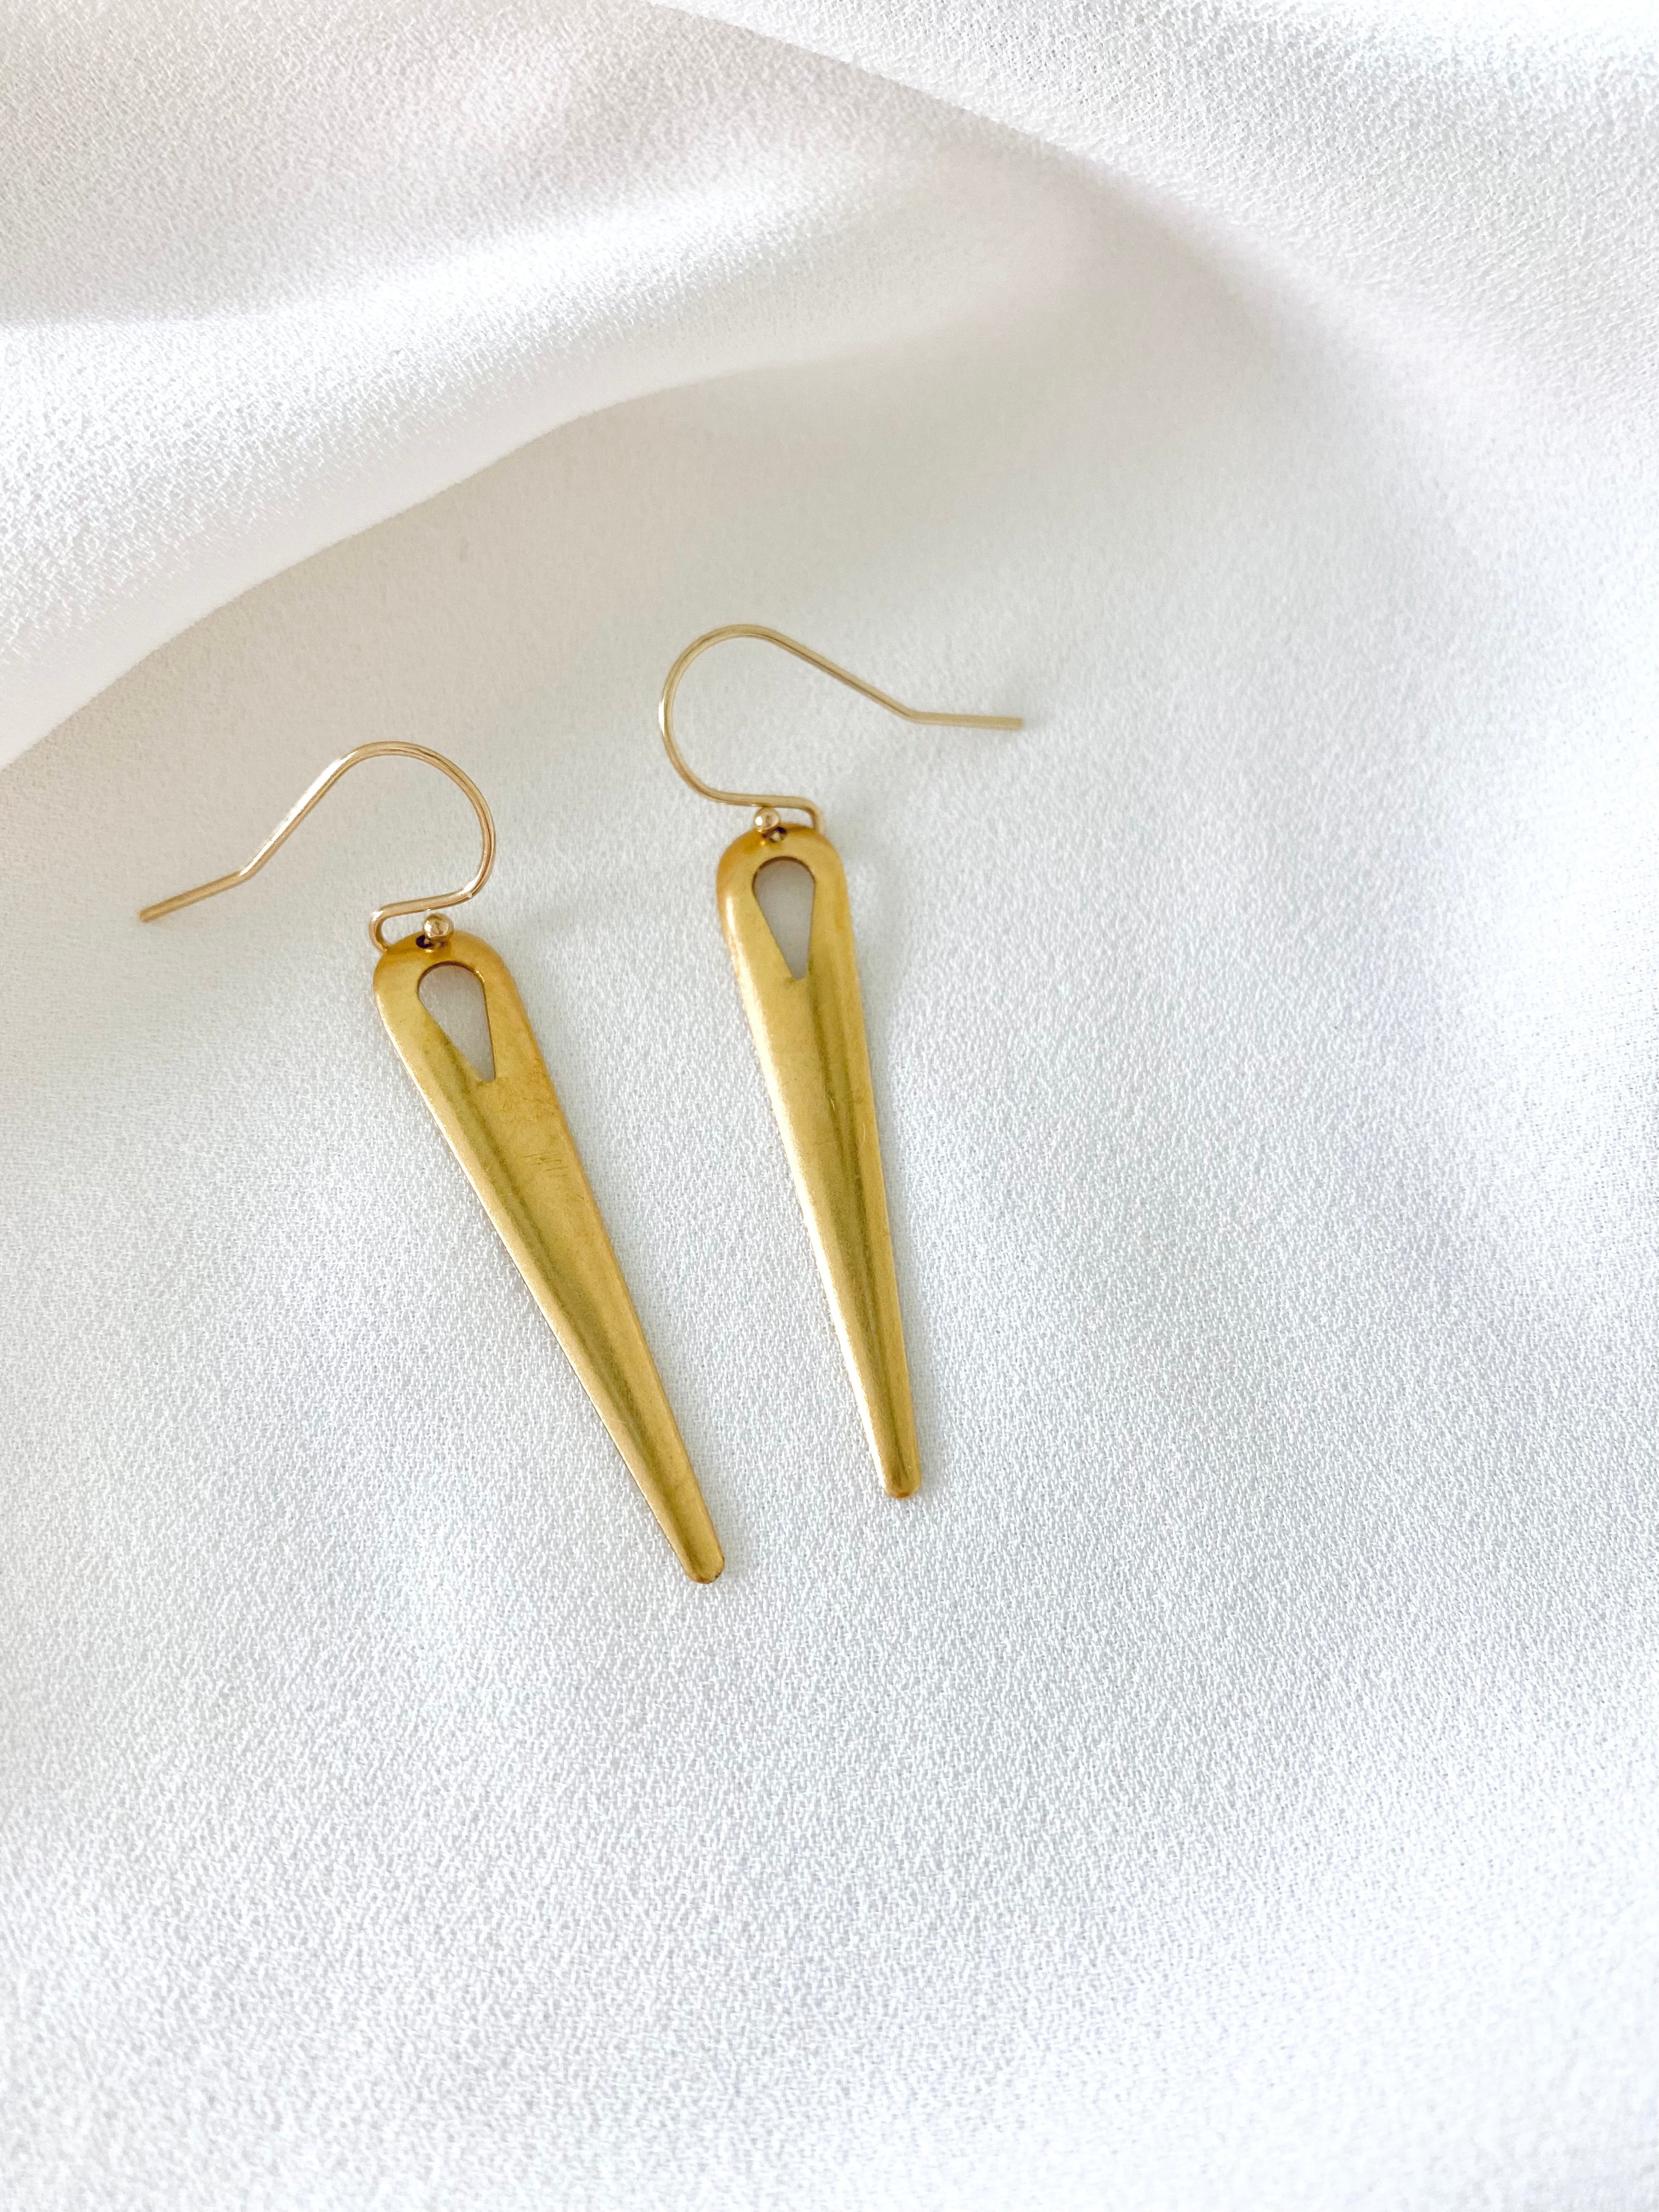 Gold Dangle Drop Earrings - Gold Filled Hooks - Festival Jewelry - Feather Weight